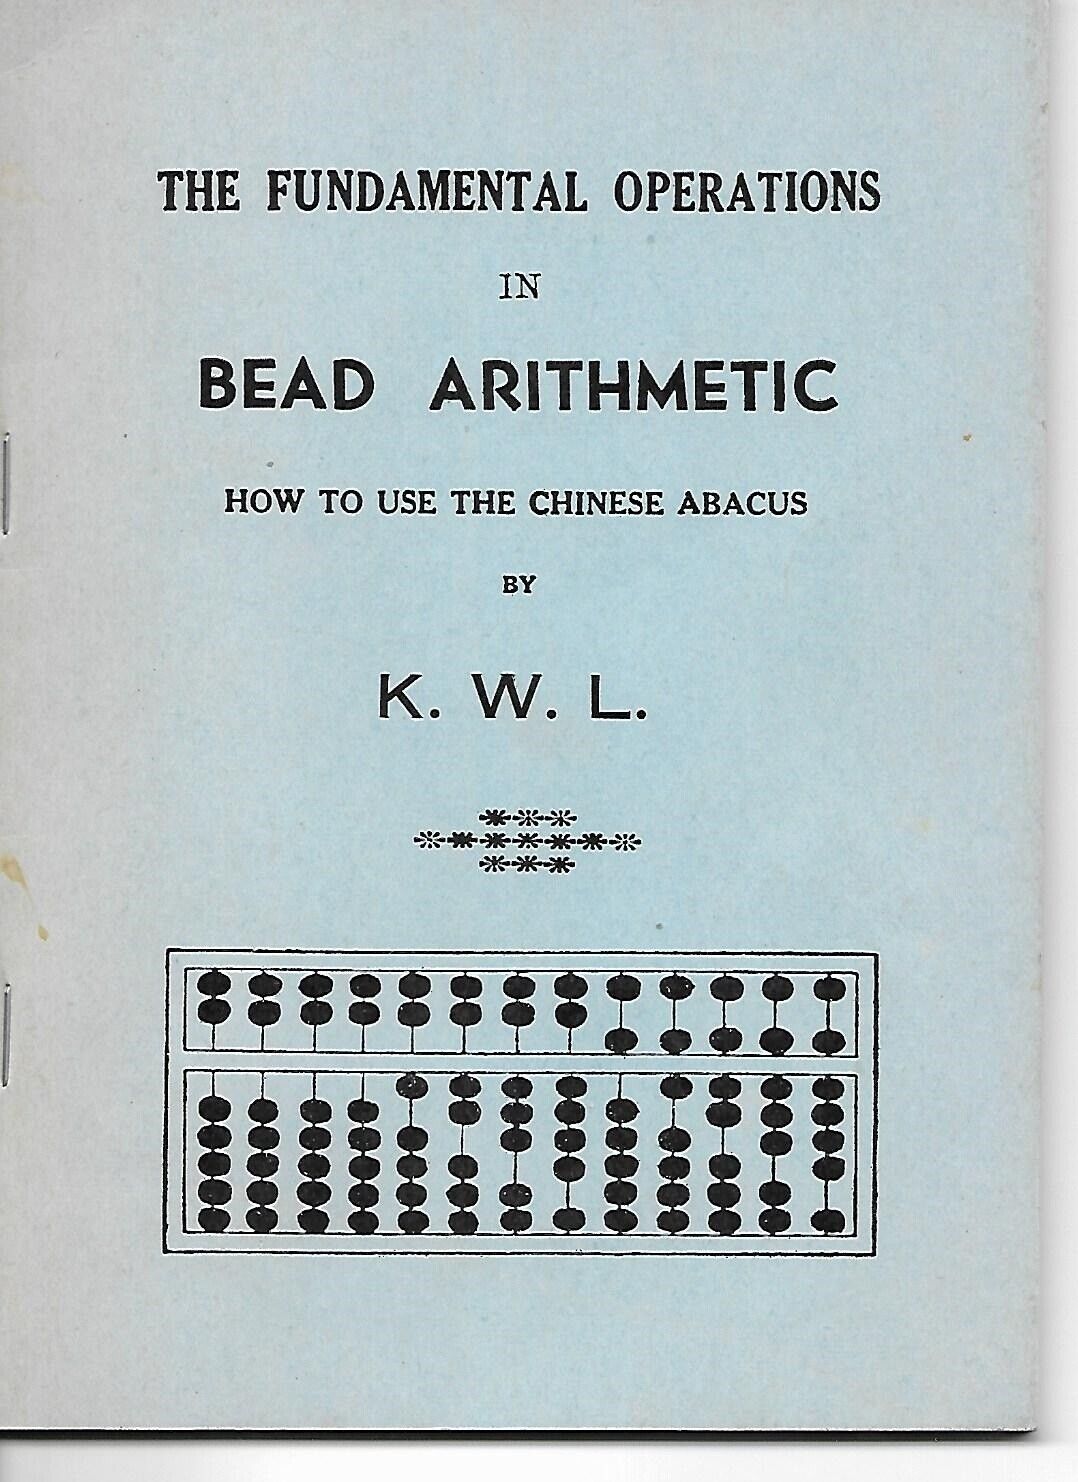 1940s Booklet ~ FUNDAMENTAL OPERATIONS IN BEAD ARITHMETIC ~ Abacus by K.W.L.